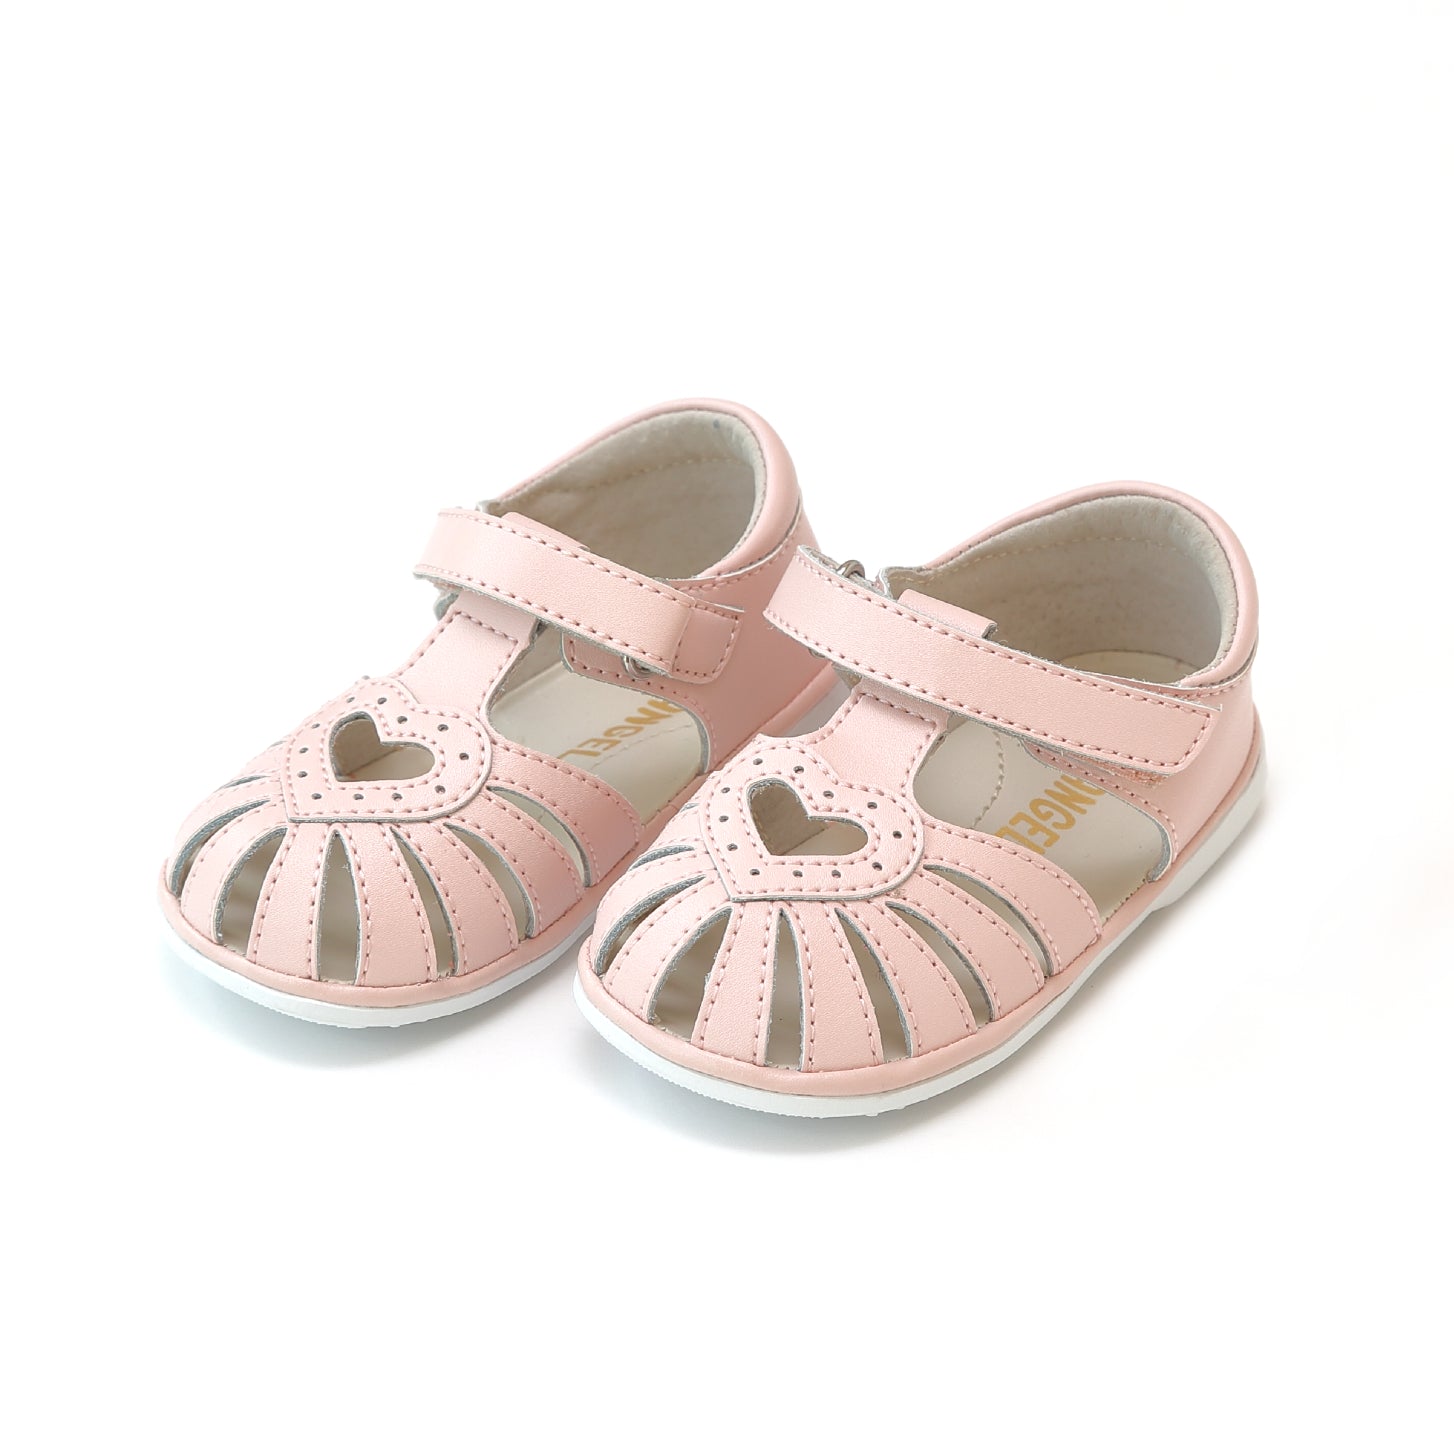 Emmie Open Heart Sandal - Babies & Toddlers